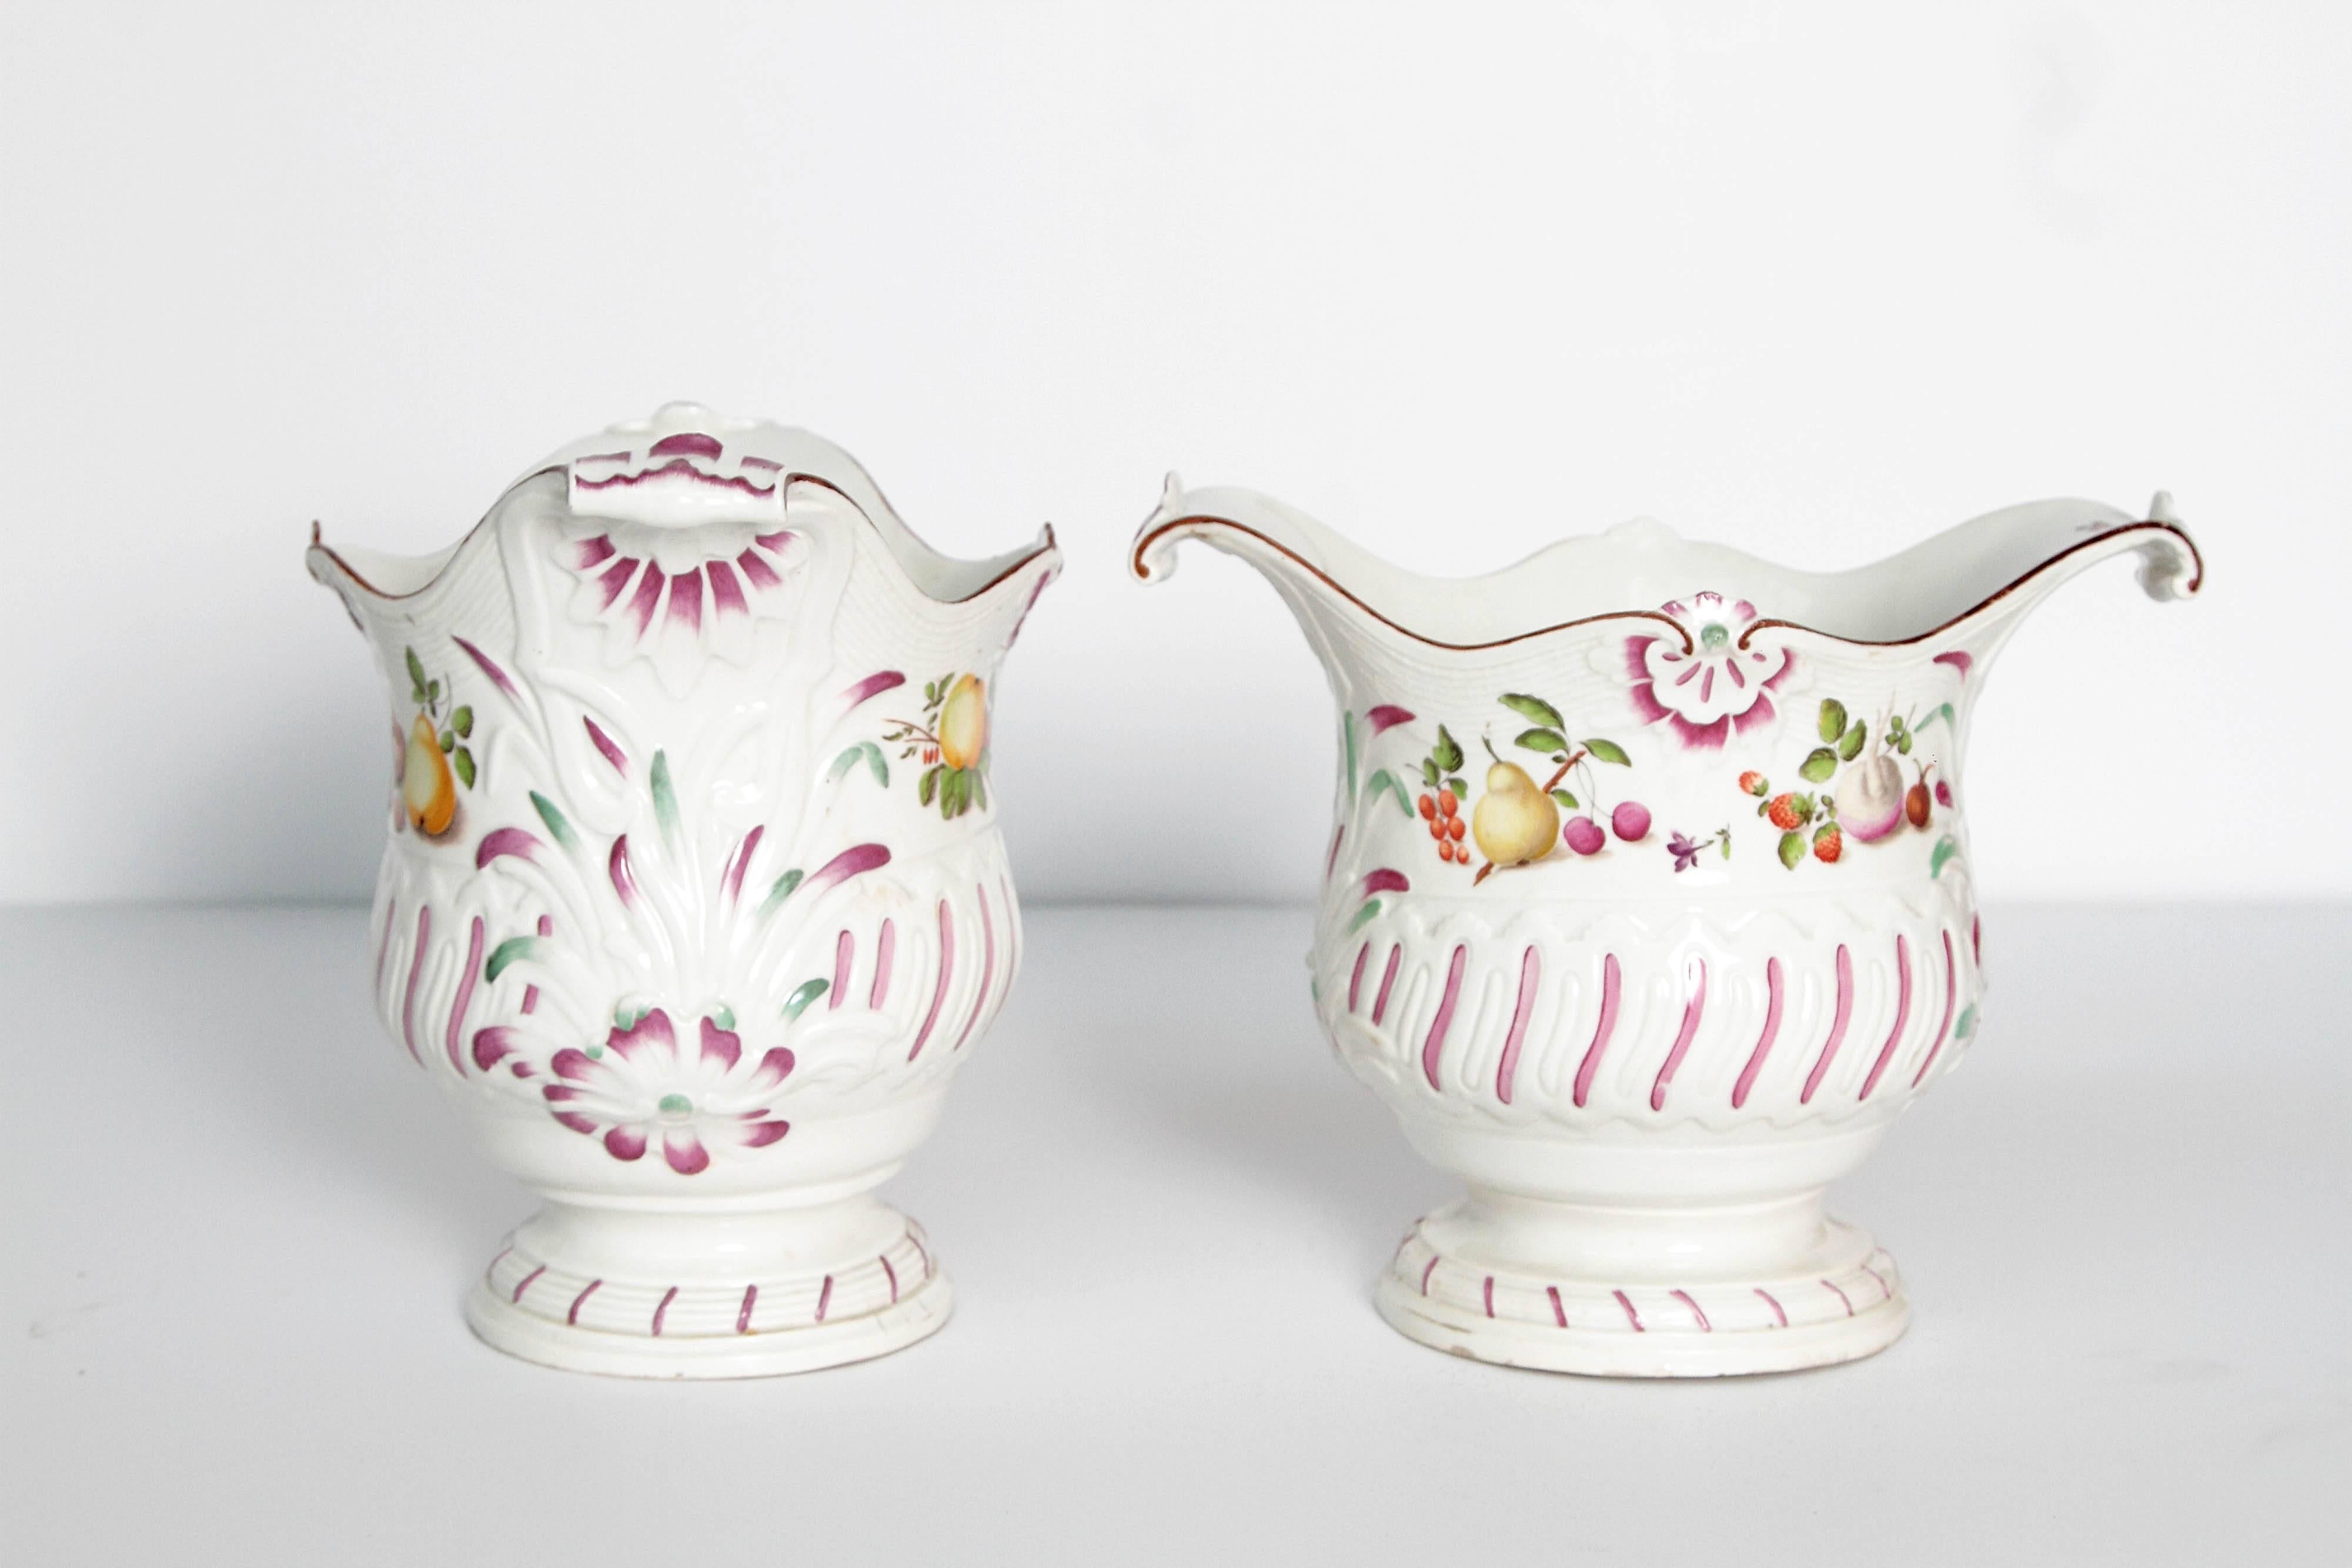 Pair of Vienna cachepots in white with raised decoration; painted with fruits and flowers and trimmed in pink.